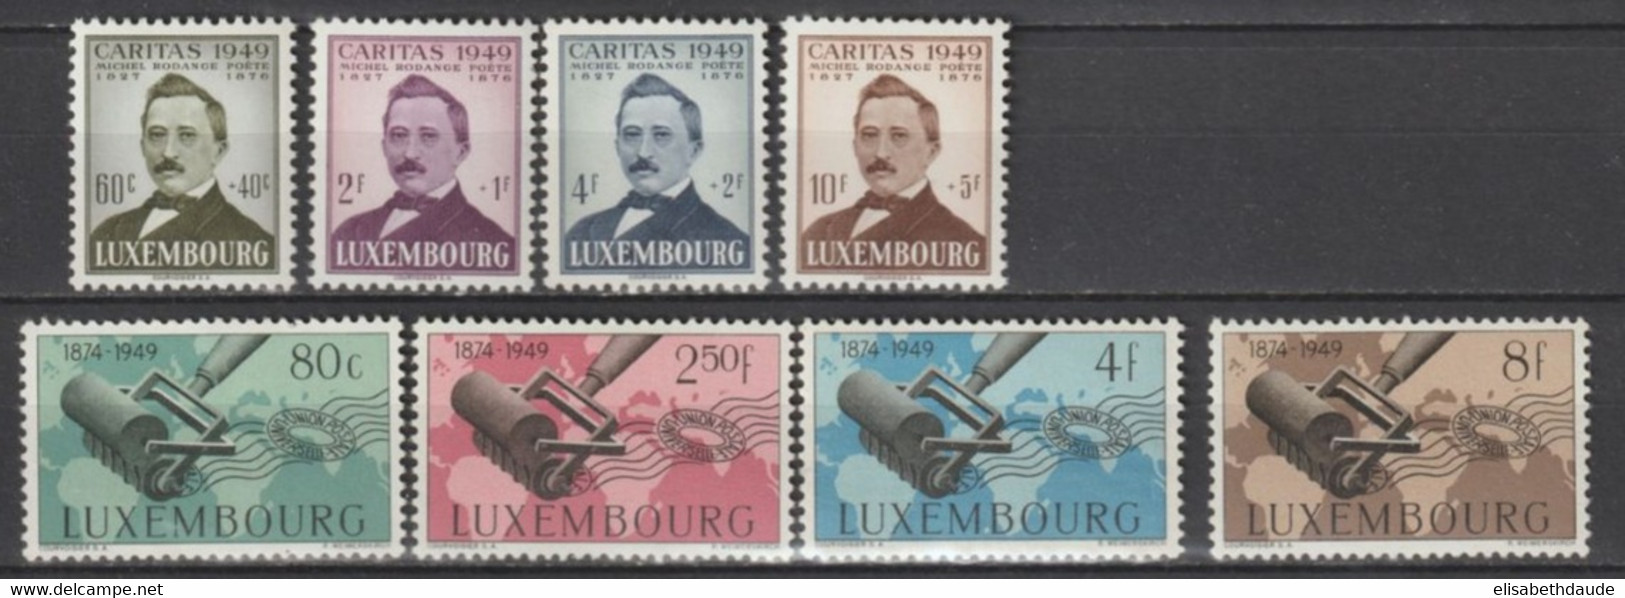 LUXEMBOURG - 1949 - ANNEE COMPLETE YVERT N°425/432 ** MNH (427 *MLH) - COTE = 60 EUR - Années Complètes